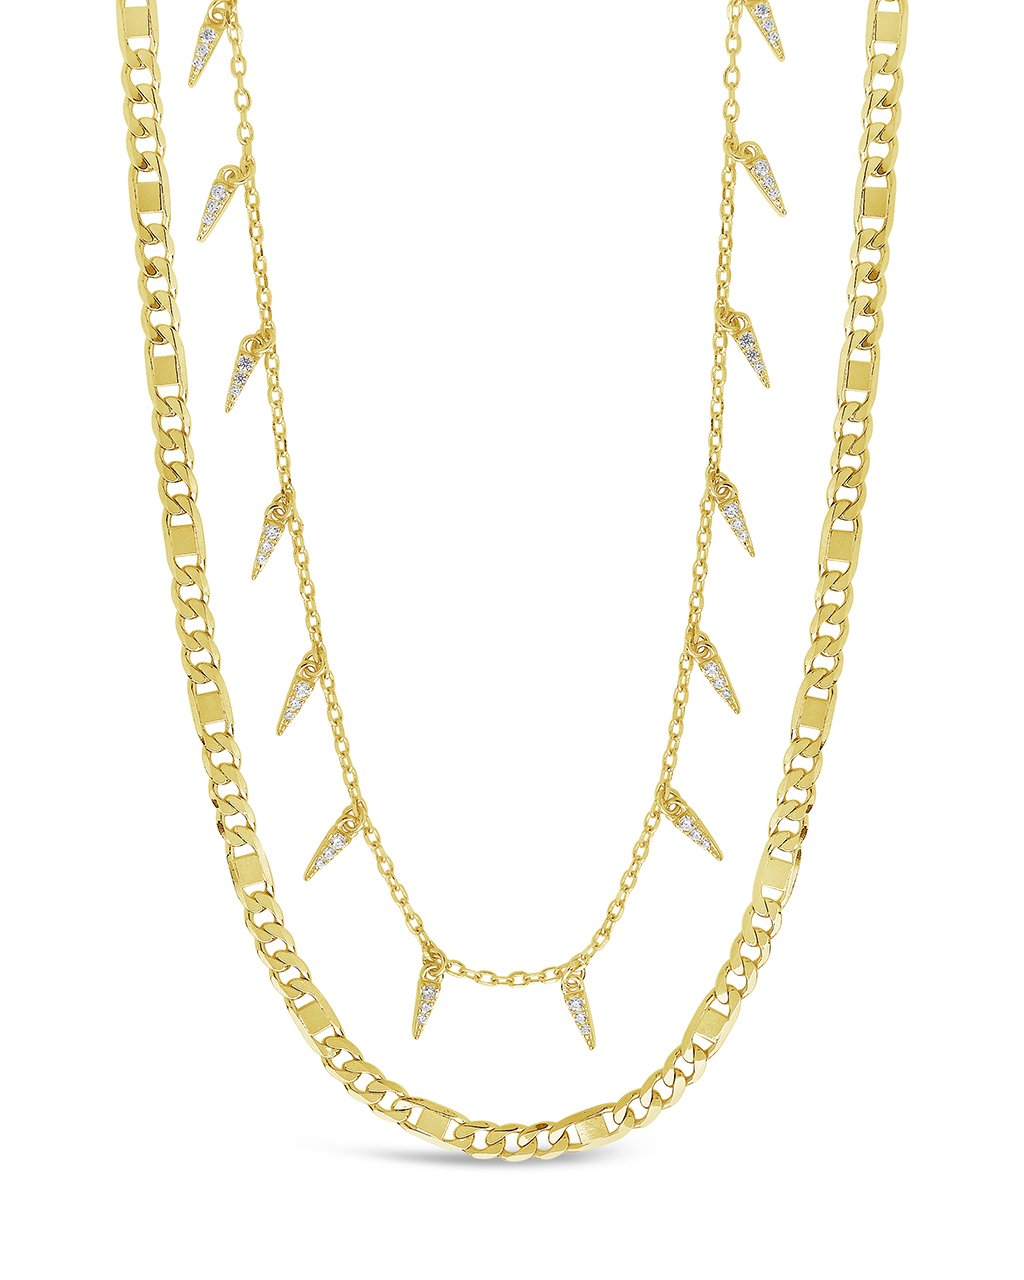 Chain & Charm Necklace Set Necklace Sterling Forever Gold 